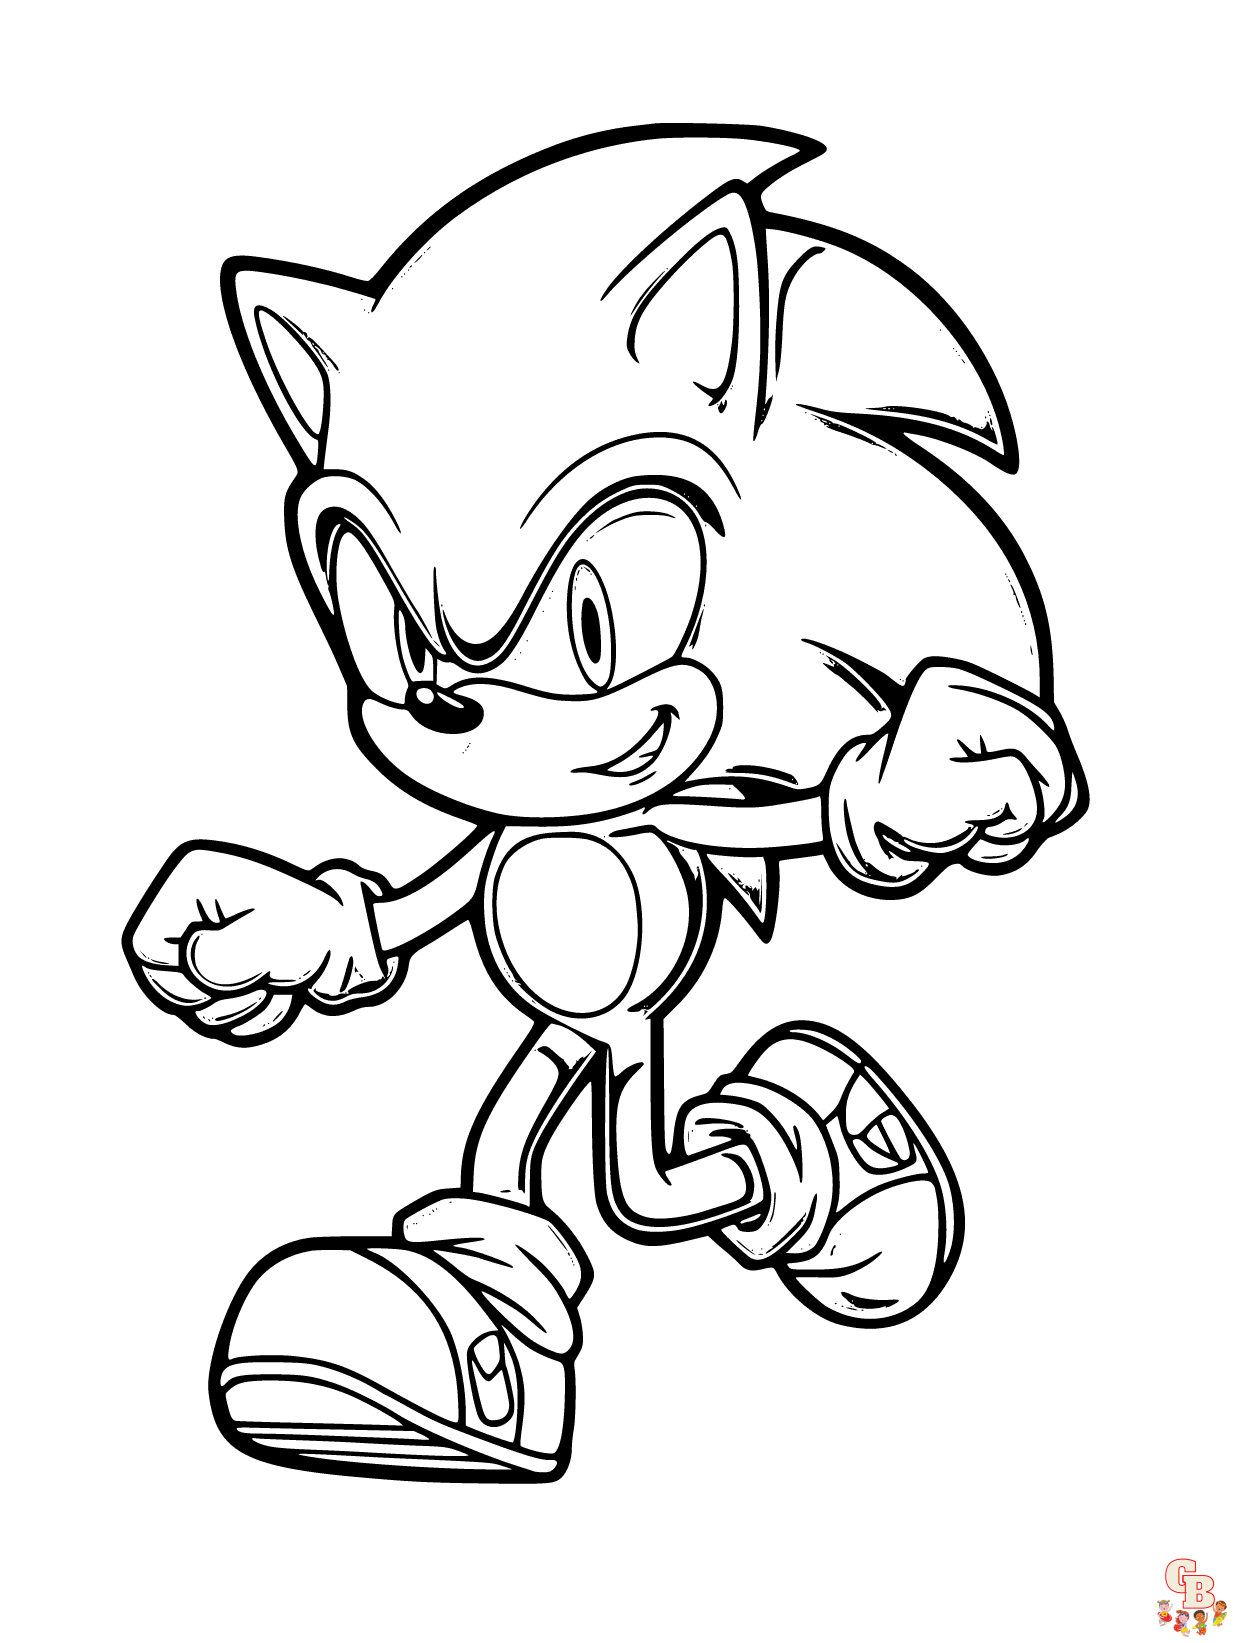 Power Of Sonic Coloring Page - Free Printable Coloring Pages for Kids